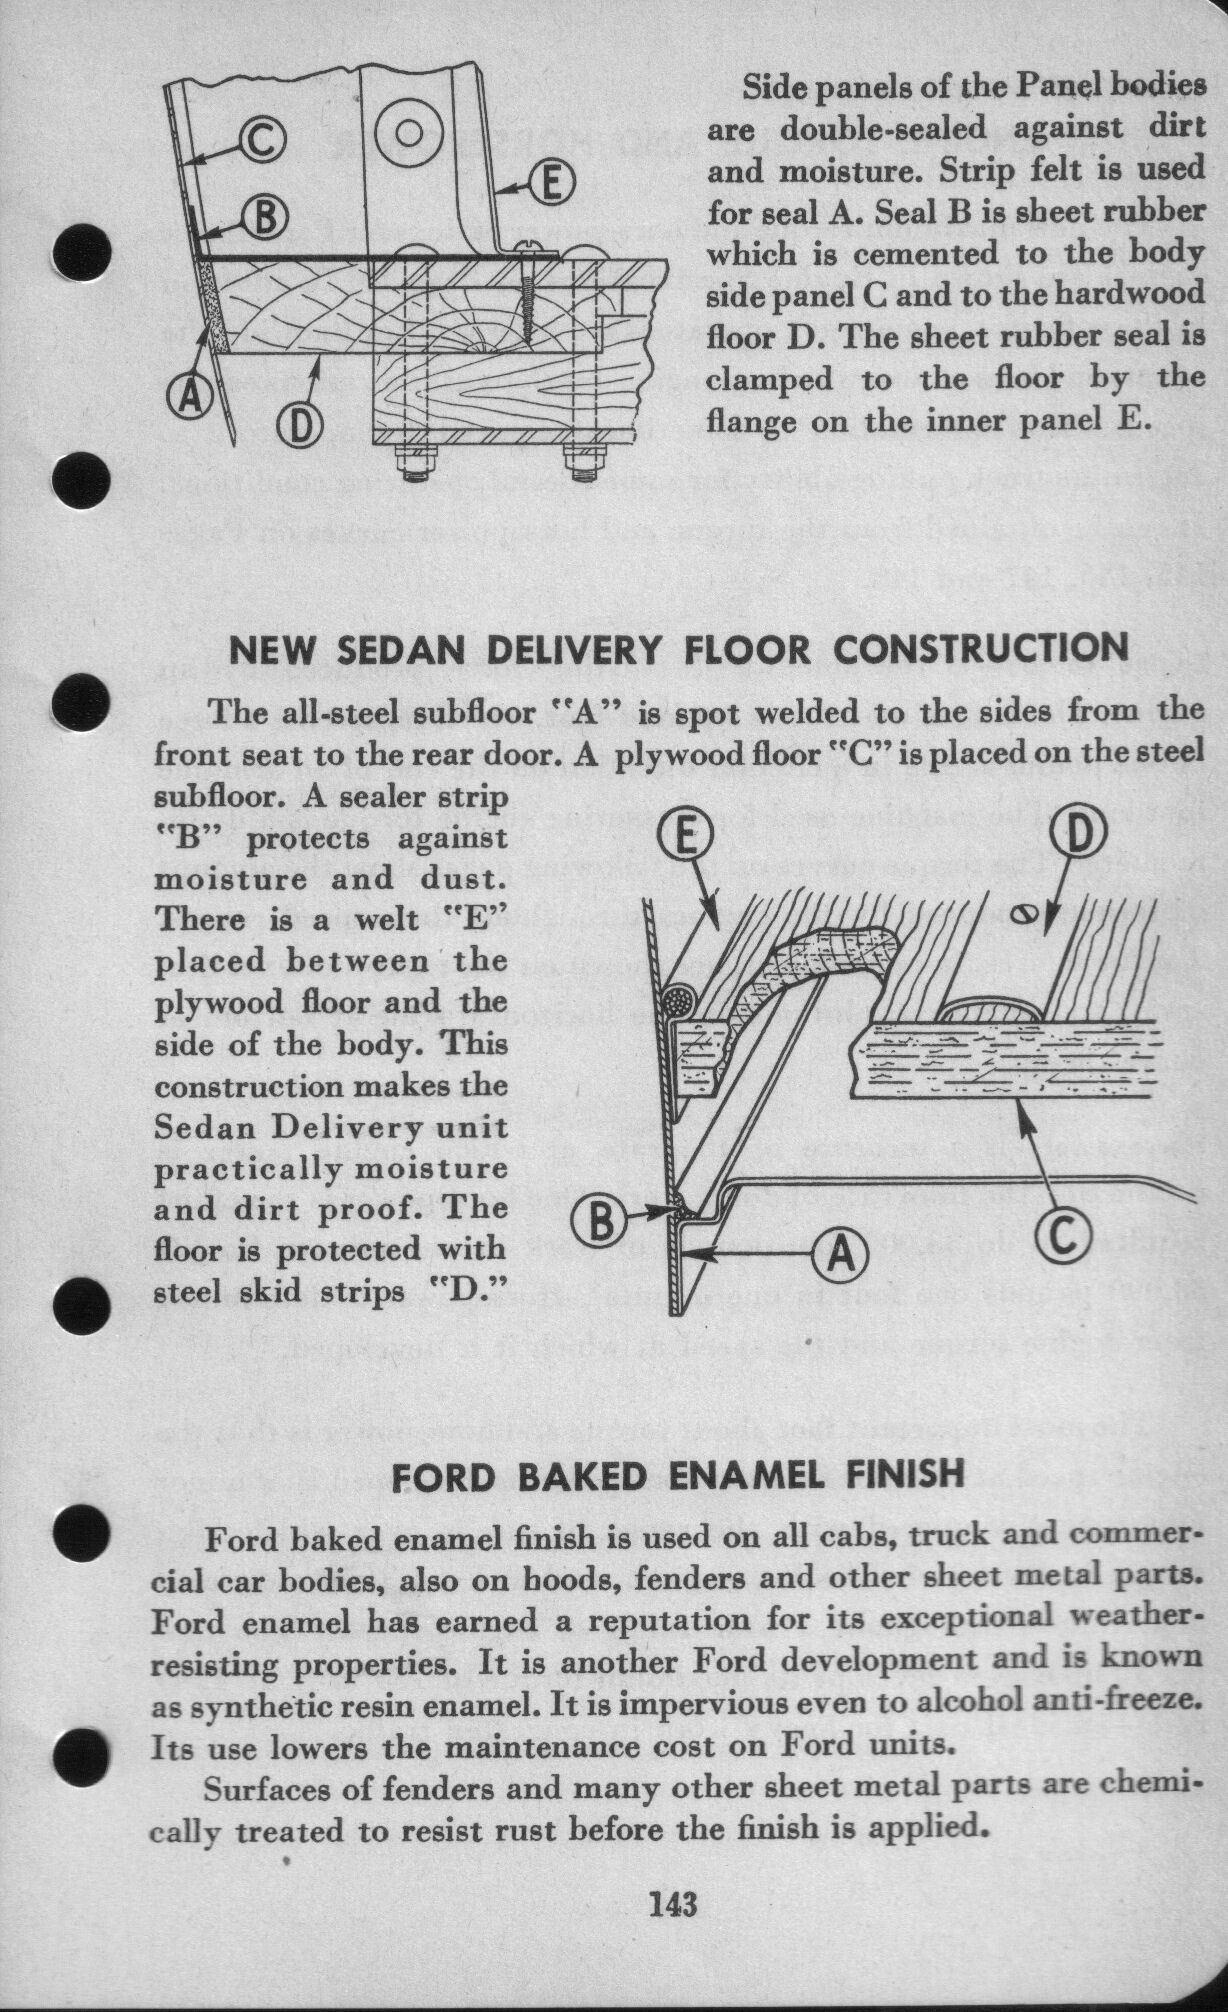 1942_Ford_Salesmans_Reference_Manual-143